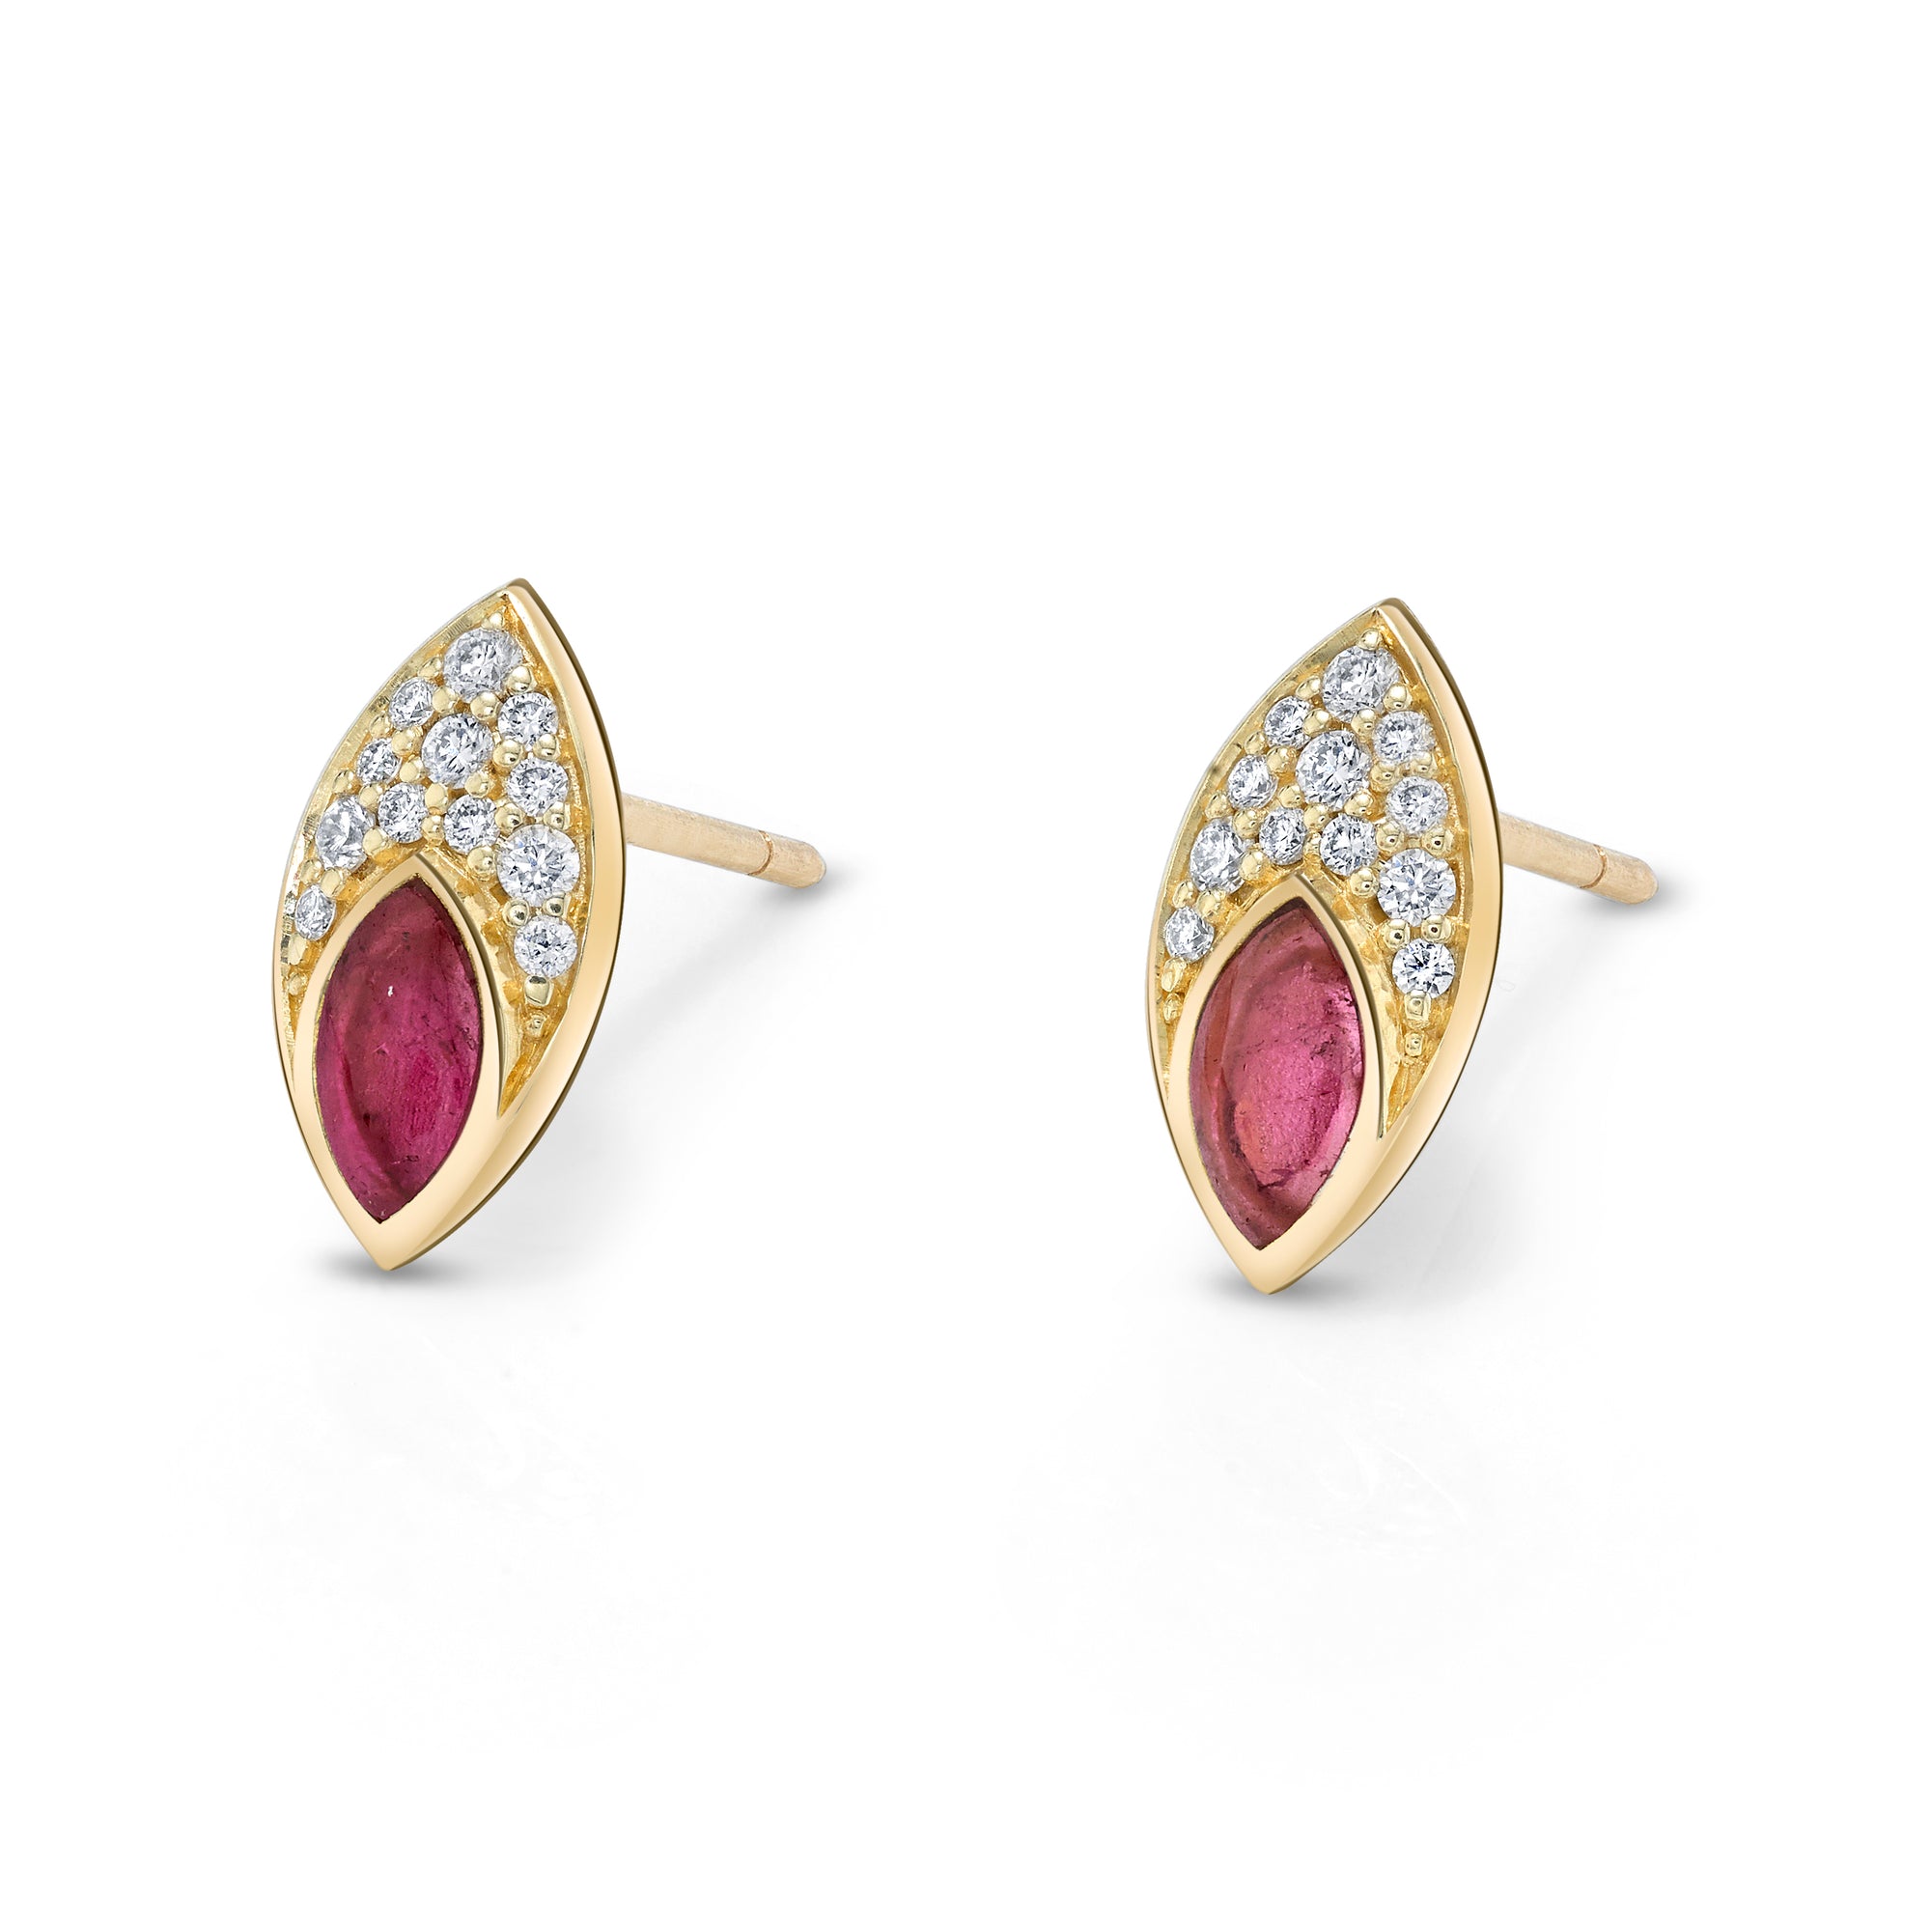 Marquise Earrings - Pink Tourmaline